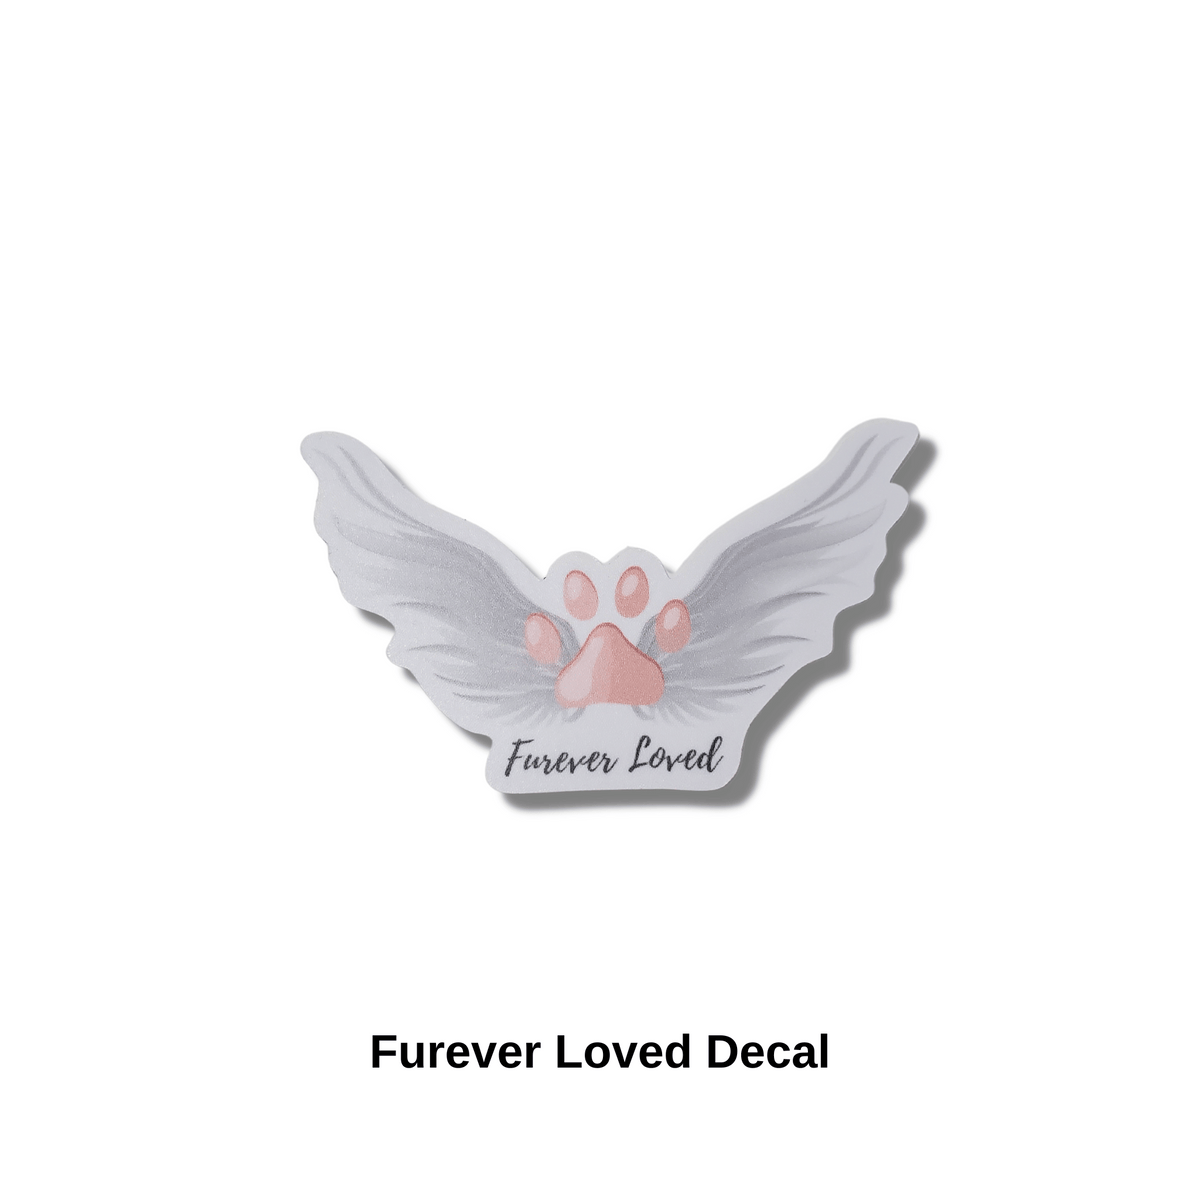 Furever Loved Decal